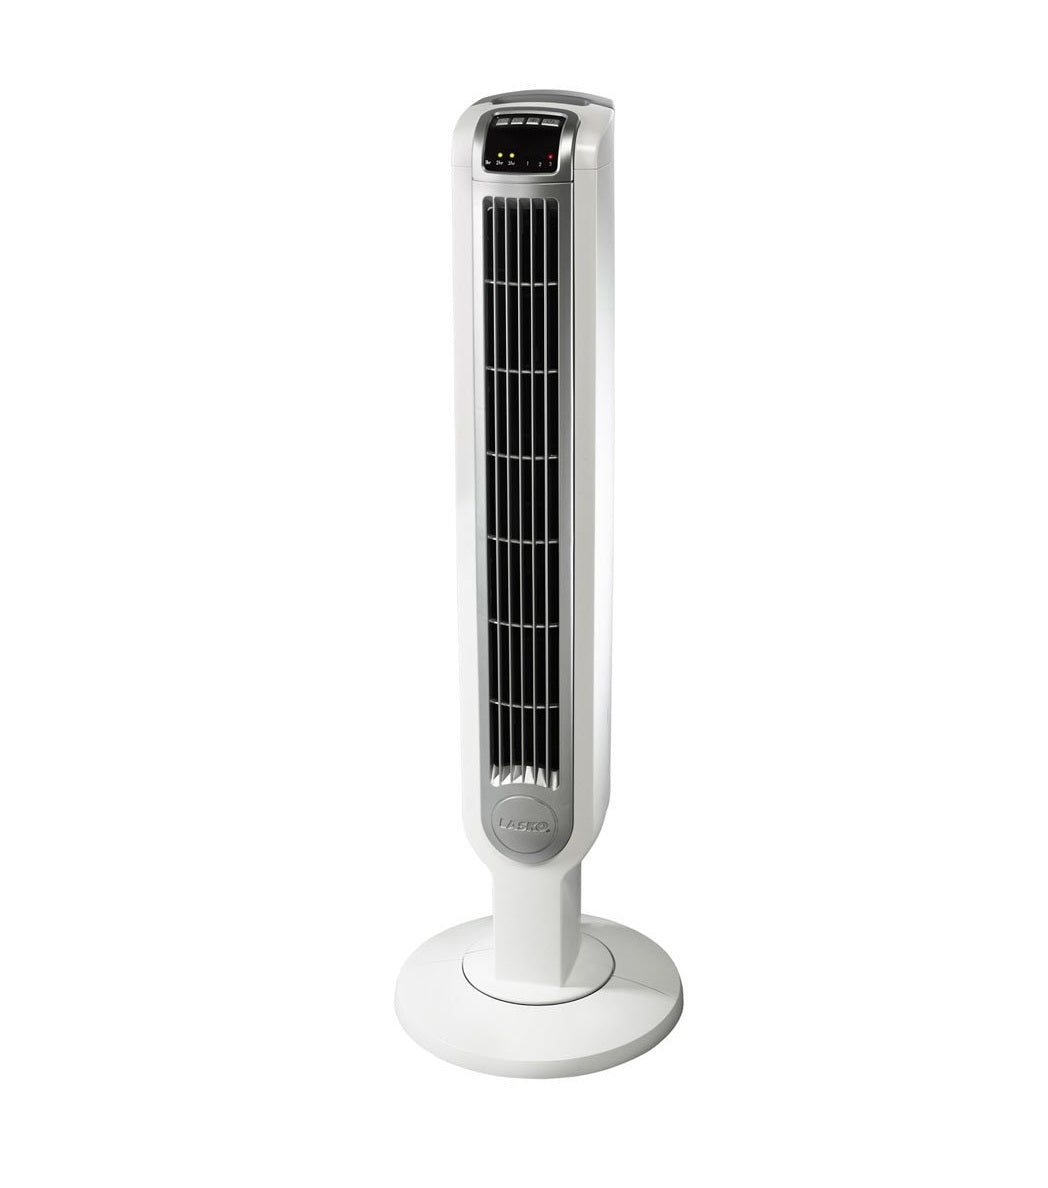 Lasko 2510 Tower Fan With Remote Control, 36 ", 3 Speed, White